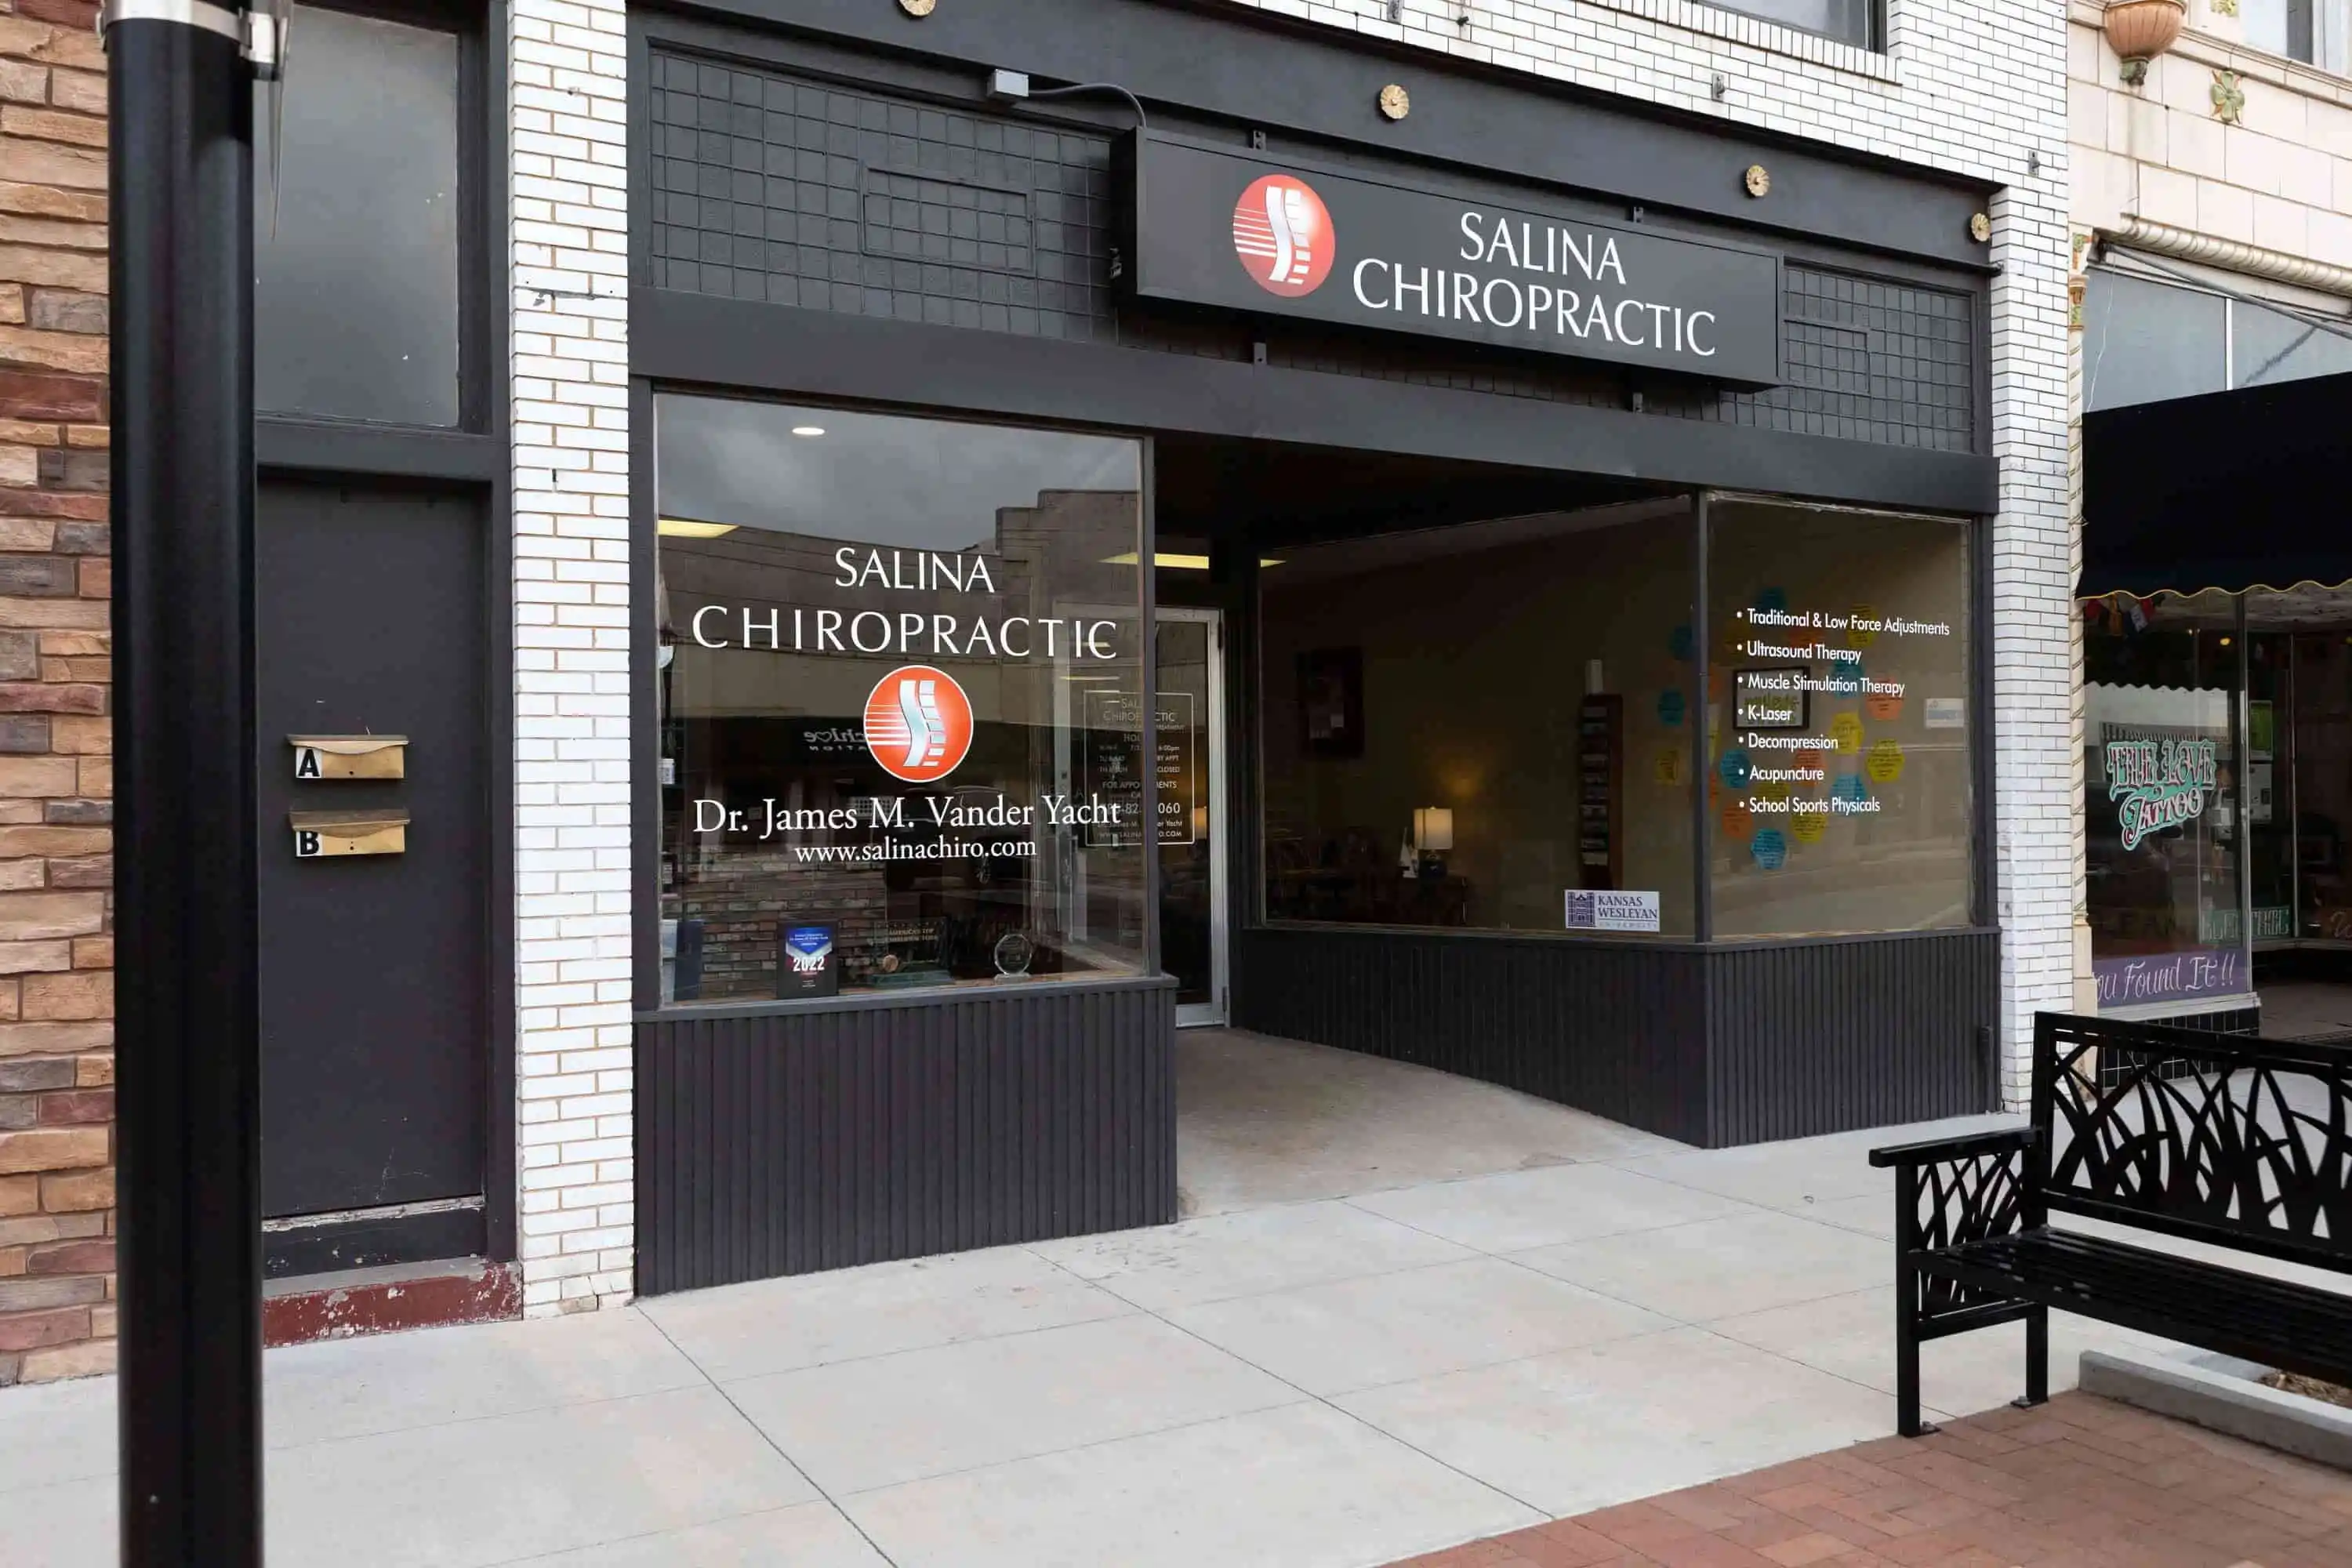 Image of a Chiropractic office.